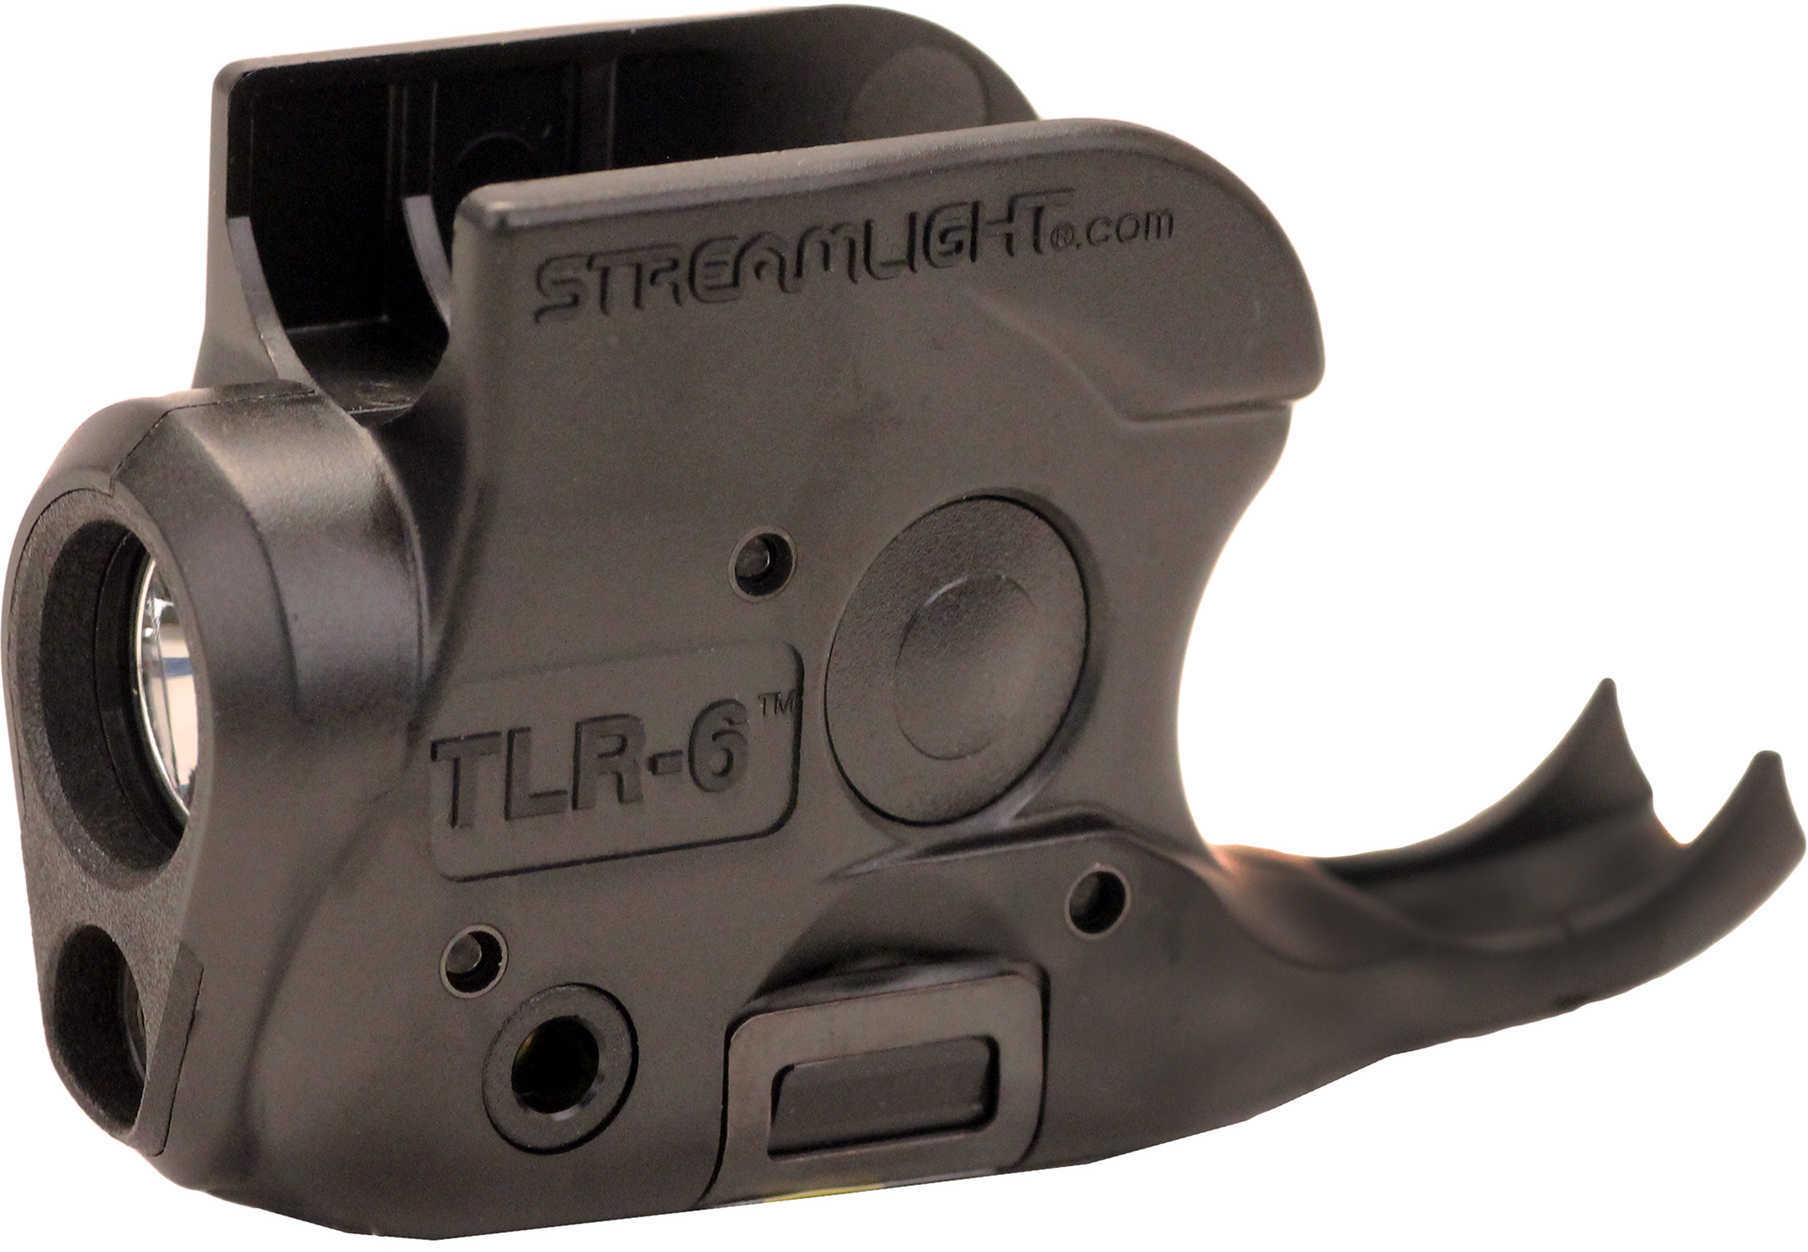 TLR-6 Subcompact Gun Mounted Light With Red Laser Kimber Micro